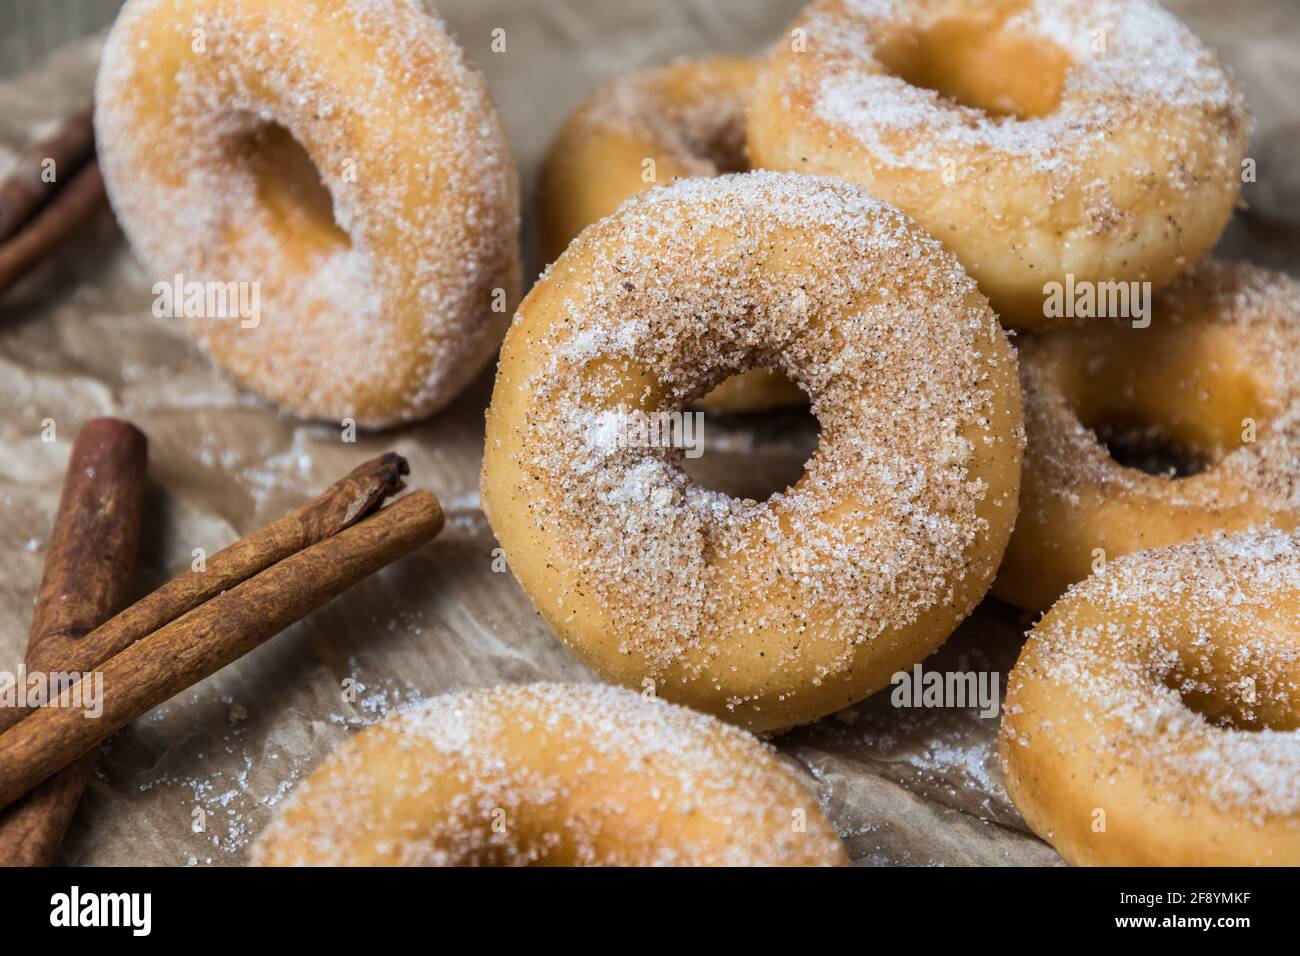 Closeup of mini donuts with sugar and cinnamon on a brown paper Stock Photo